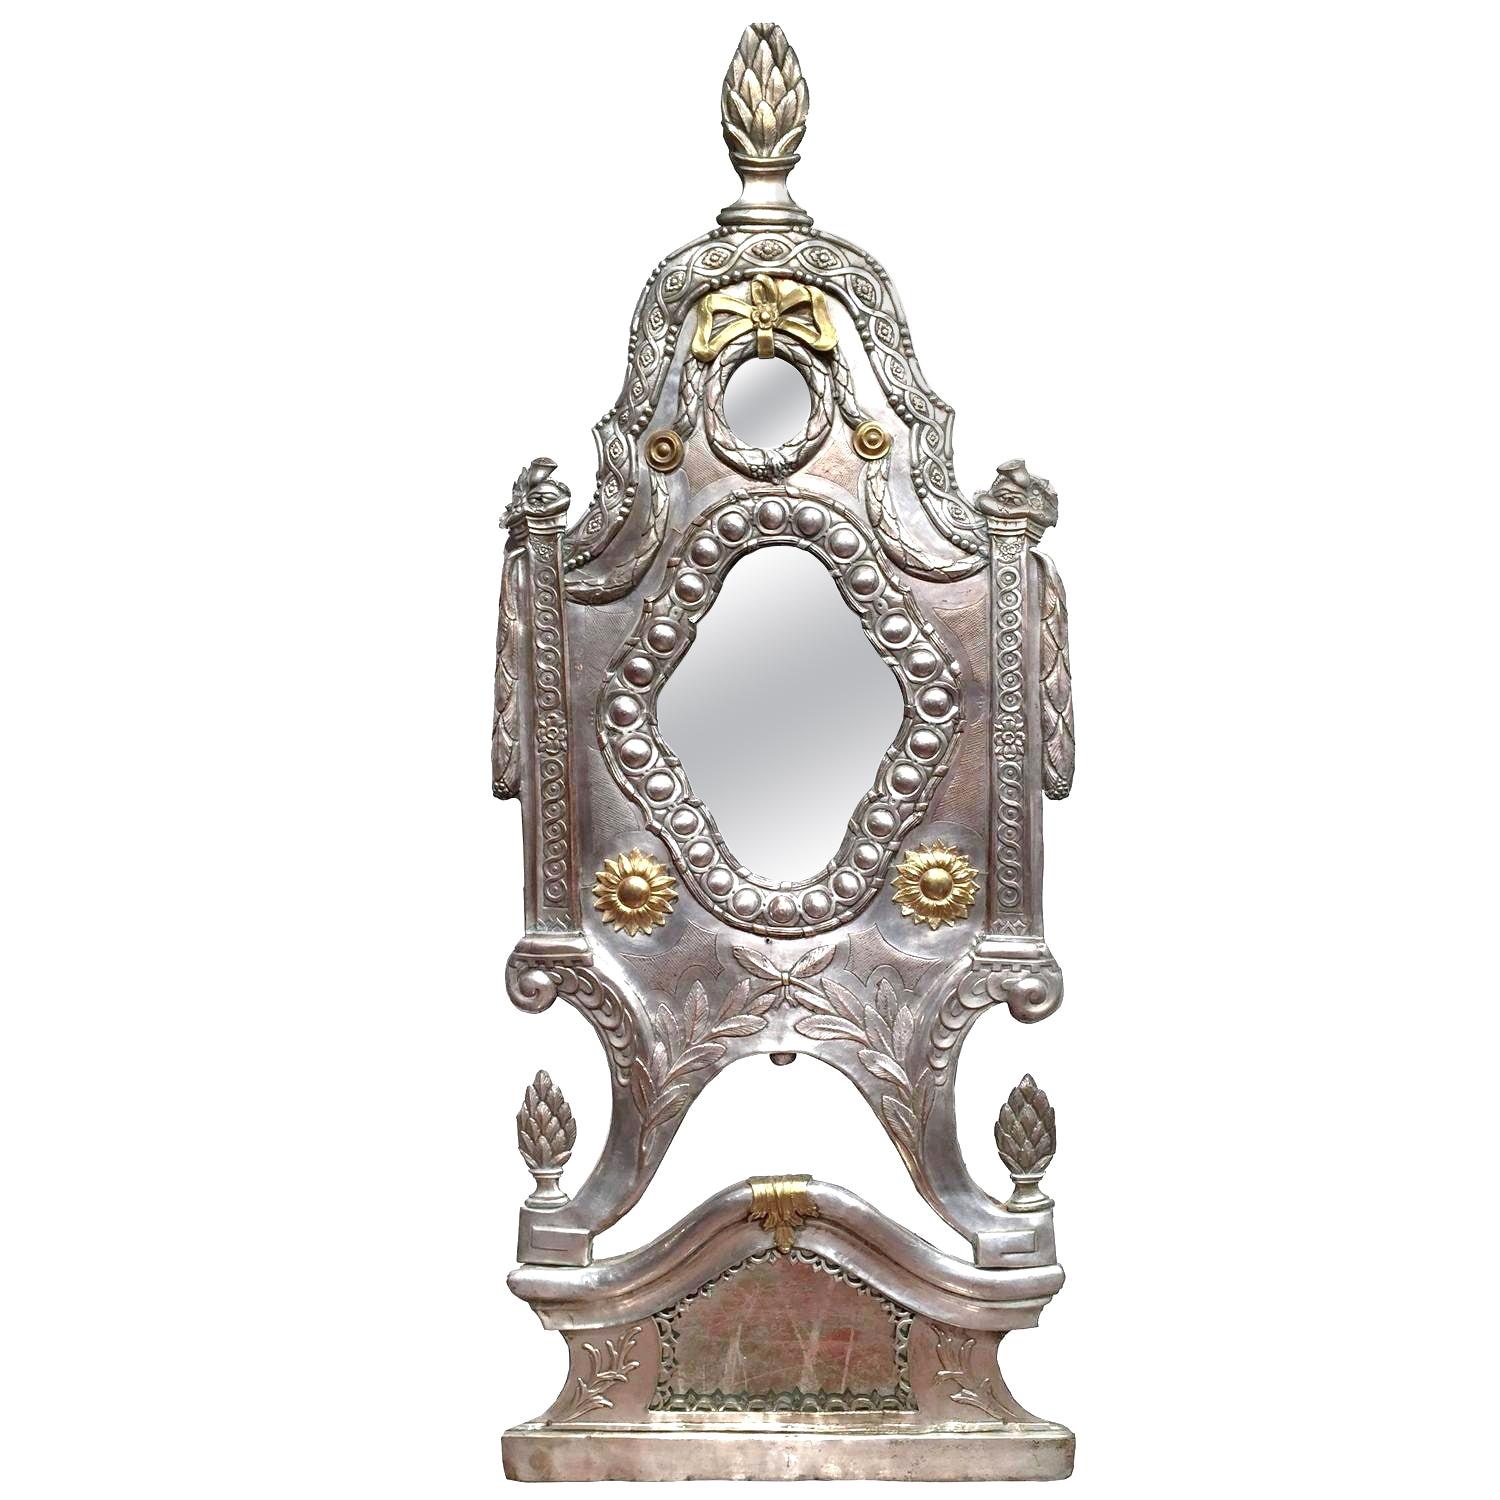 19th Century French Repousse Silver Plated and Copper Overlay Wall Mirror